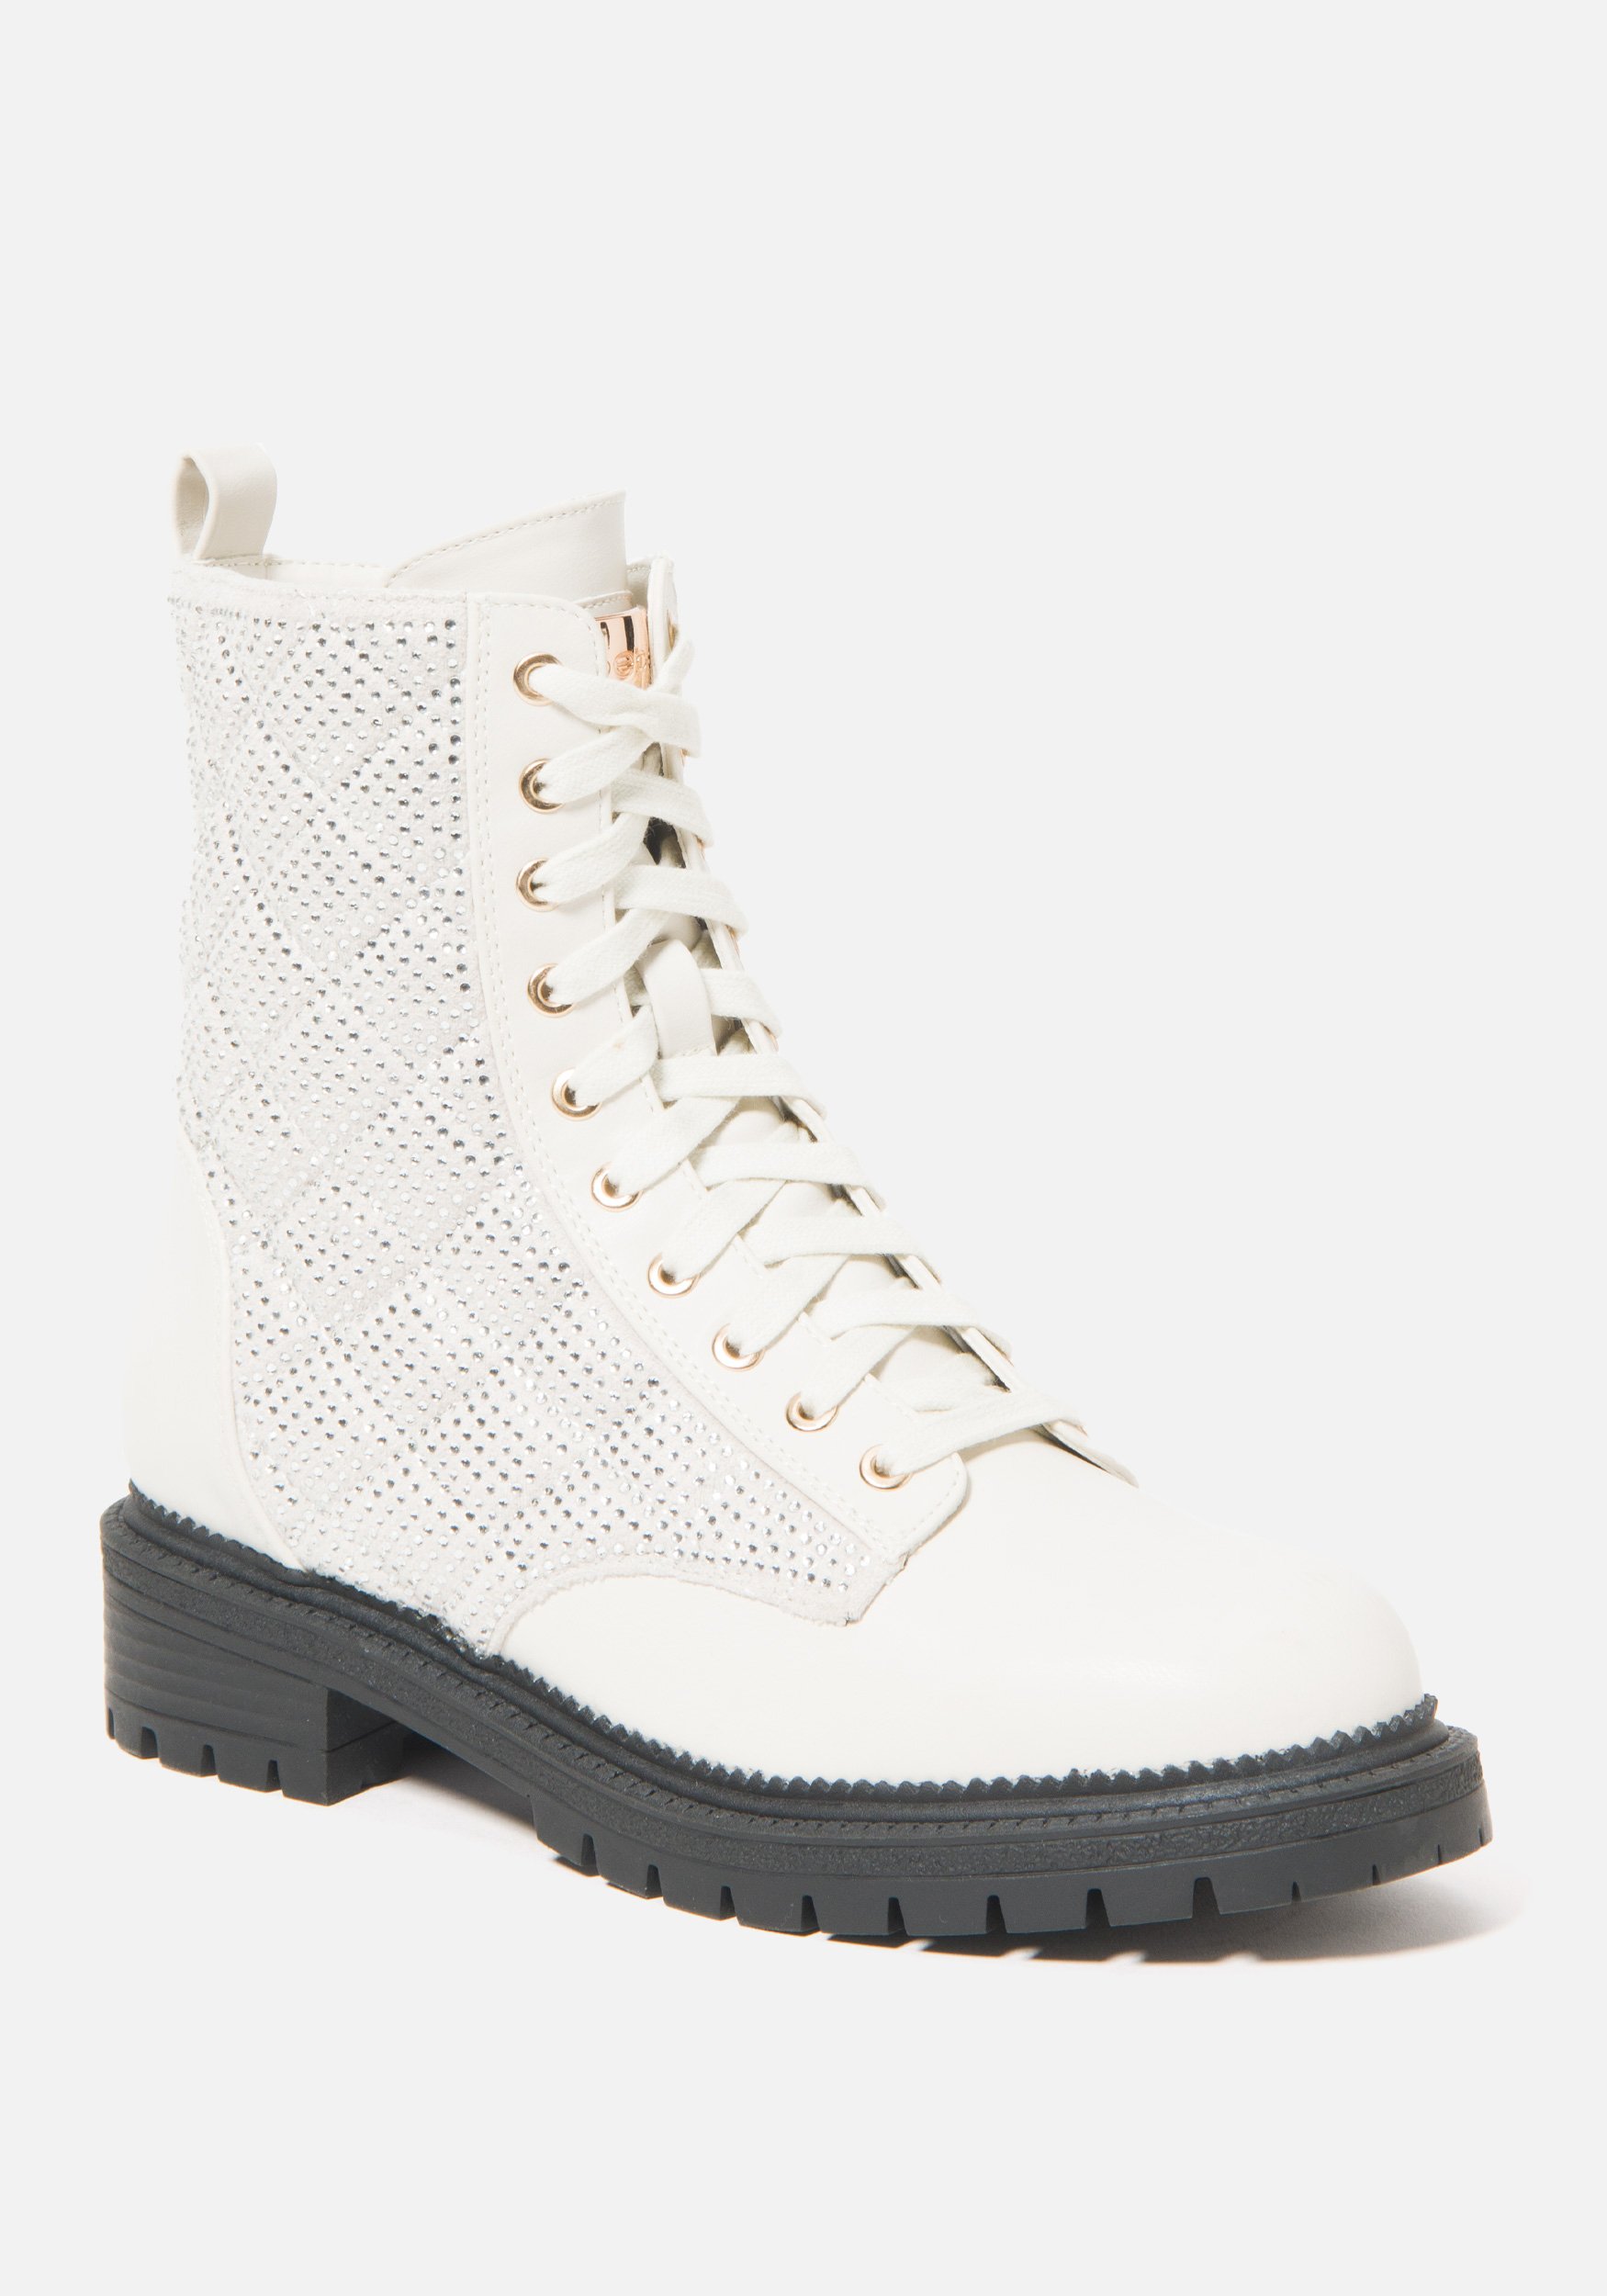 Bebe Women's Dorienne Lace Combat Boots, Size 9.5 in Off White Synthetic